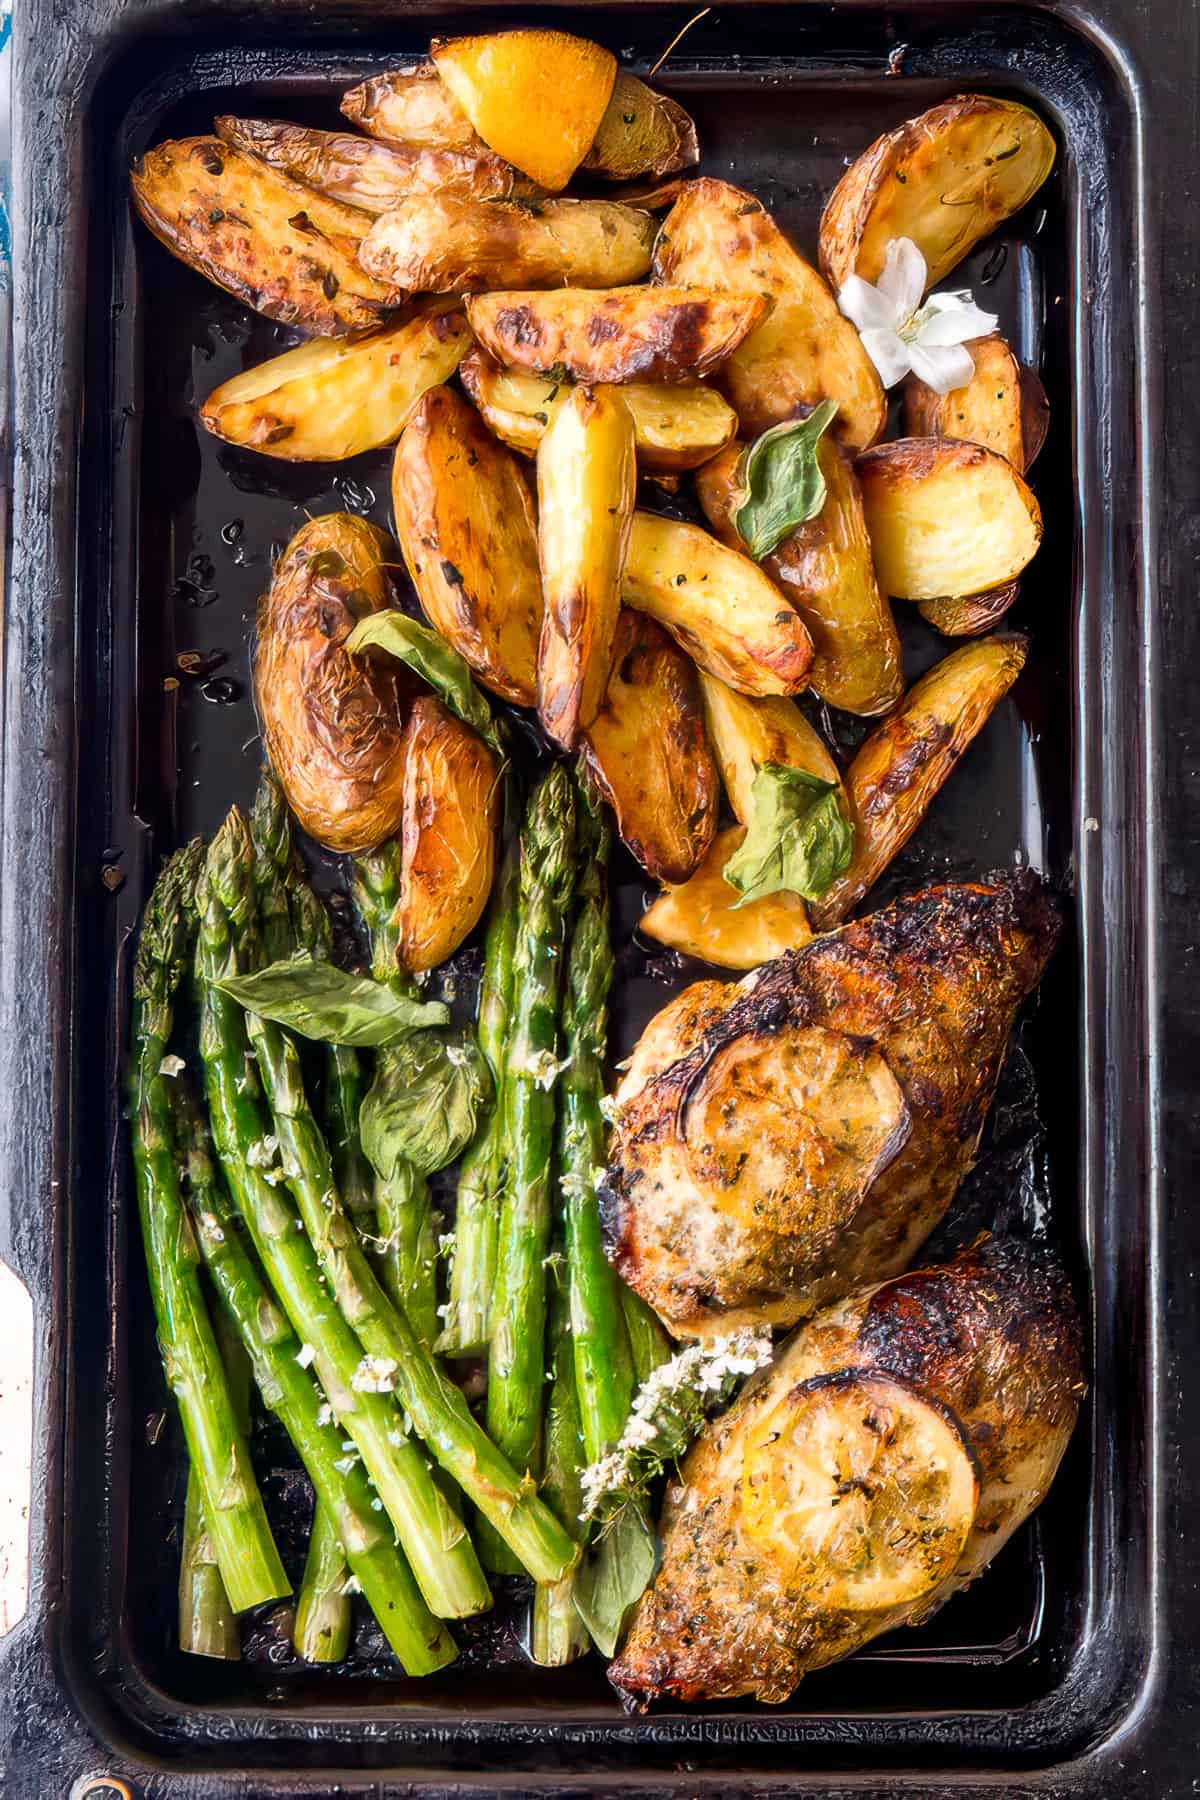 Sheet pan chicken and potatoes with lemon and herbs.